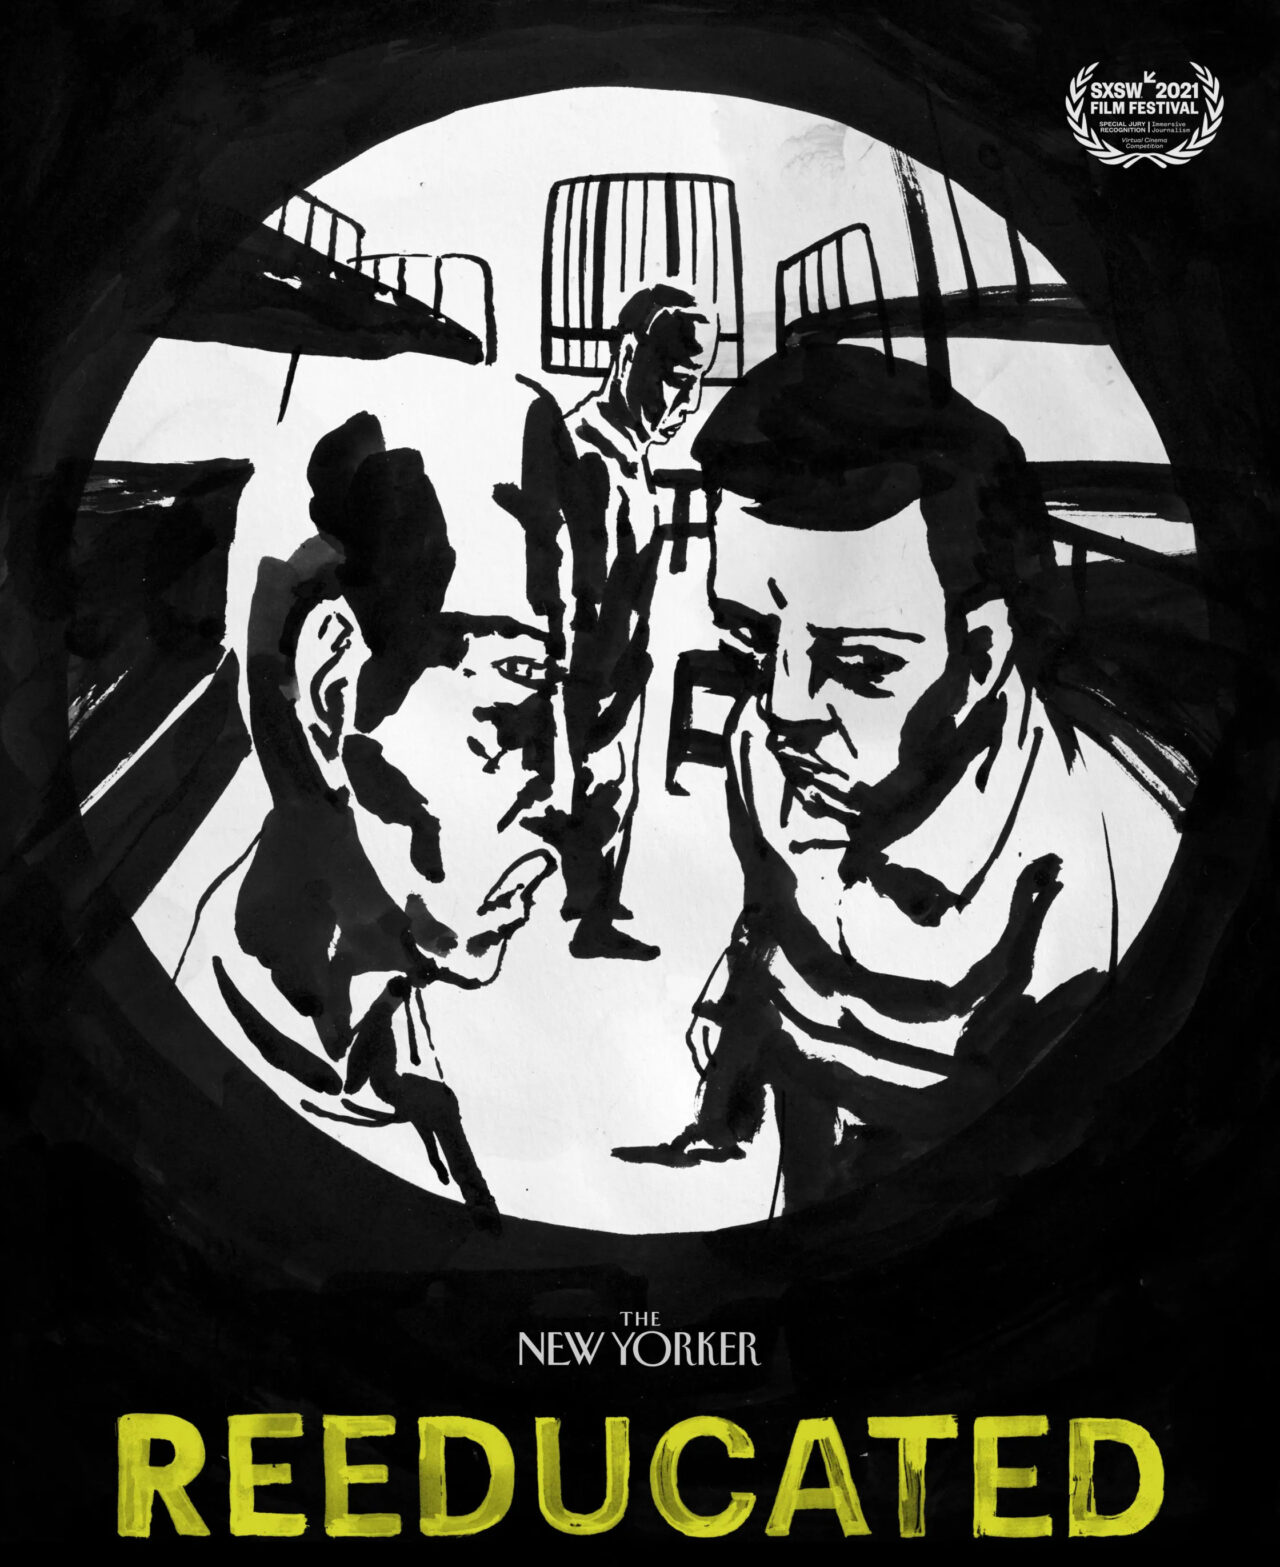 Black and white poster art with yellow lettering. A circle sits in the center. Inside we see three hand drawn men in a cell. Underneath the image is the logo for the New Yorker, then the title Uneducated in yellow.